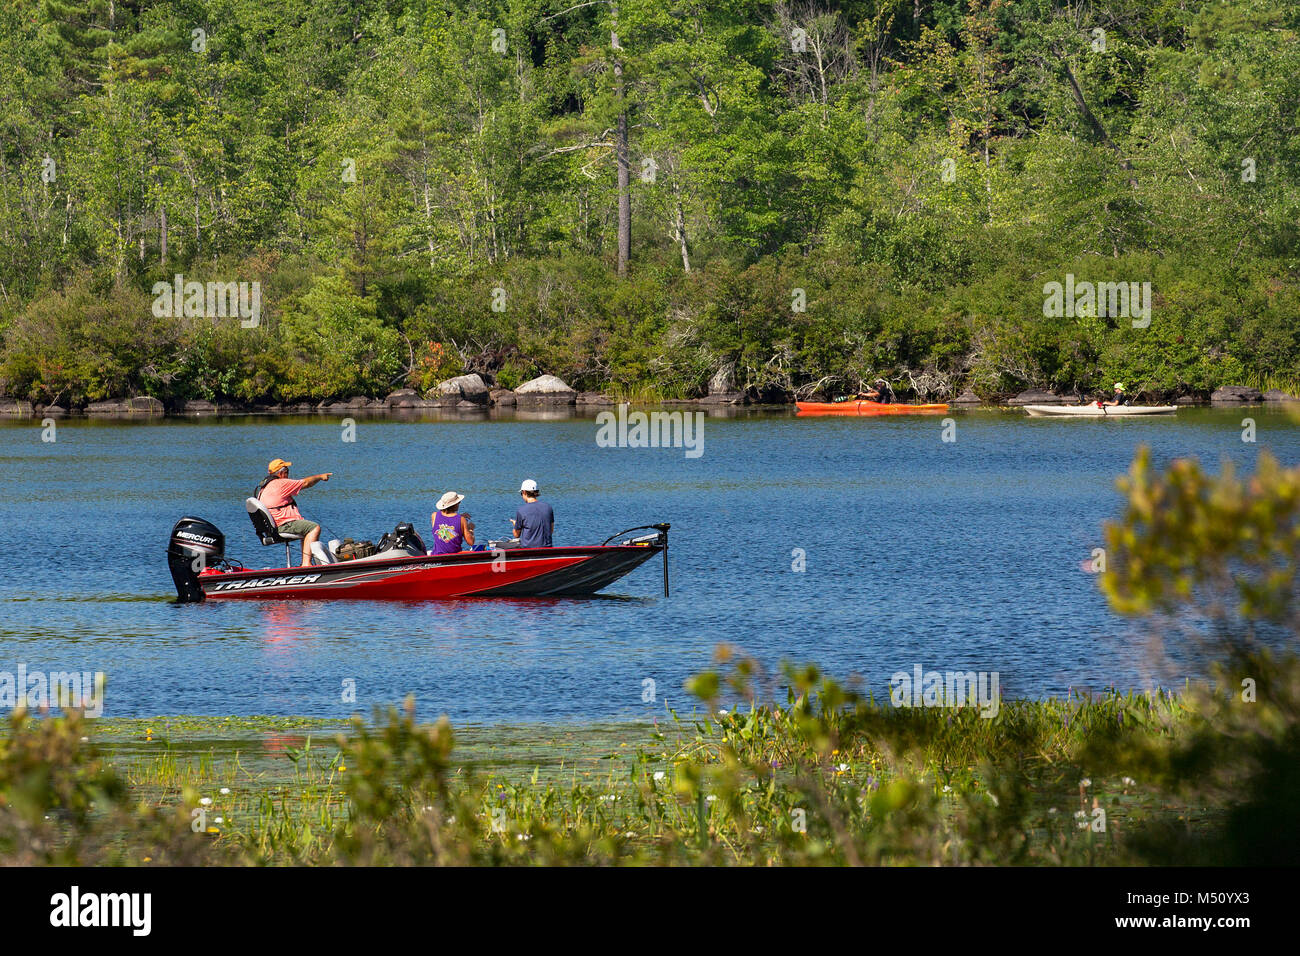 Families engage in recreational boating fishing and kayaking on Squam Lake in Moultonborough, NH, USA. Stock Photo